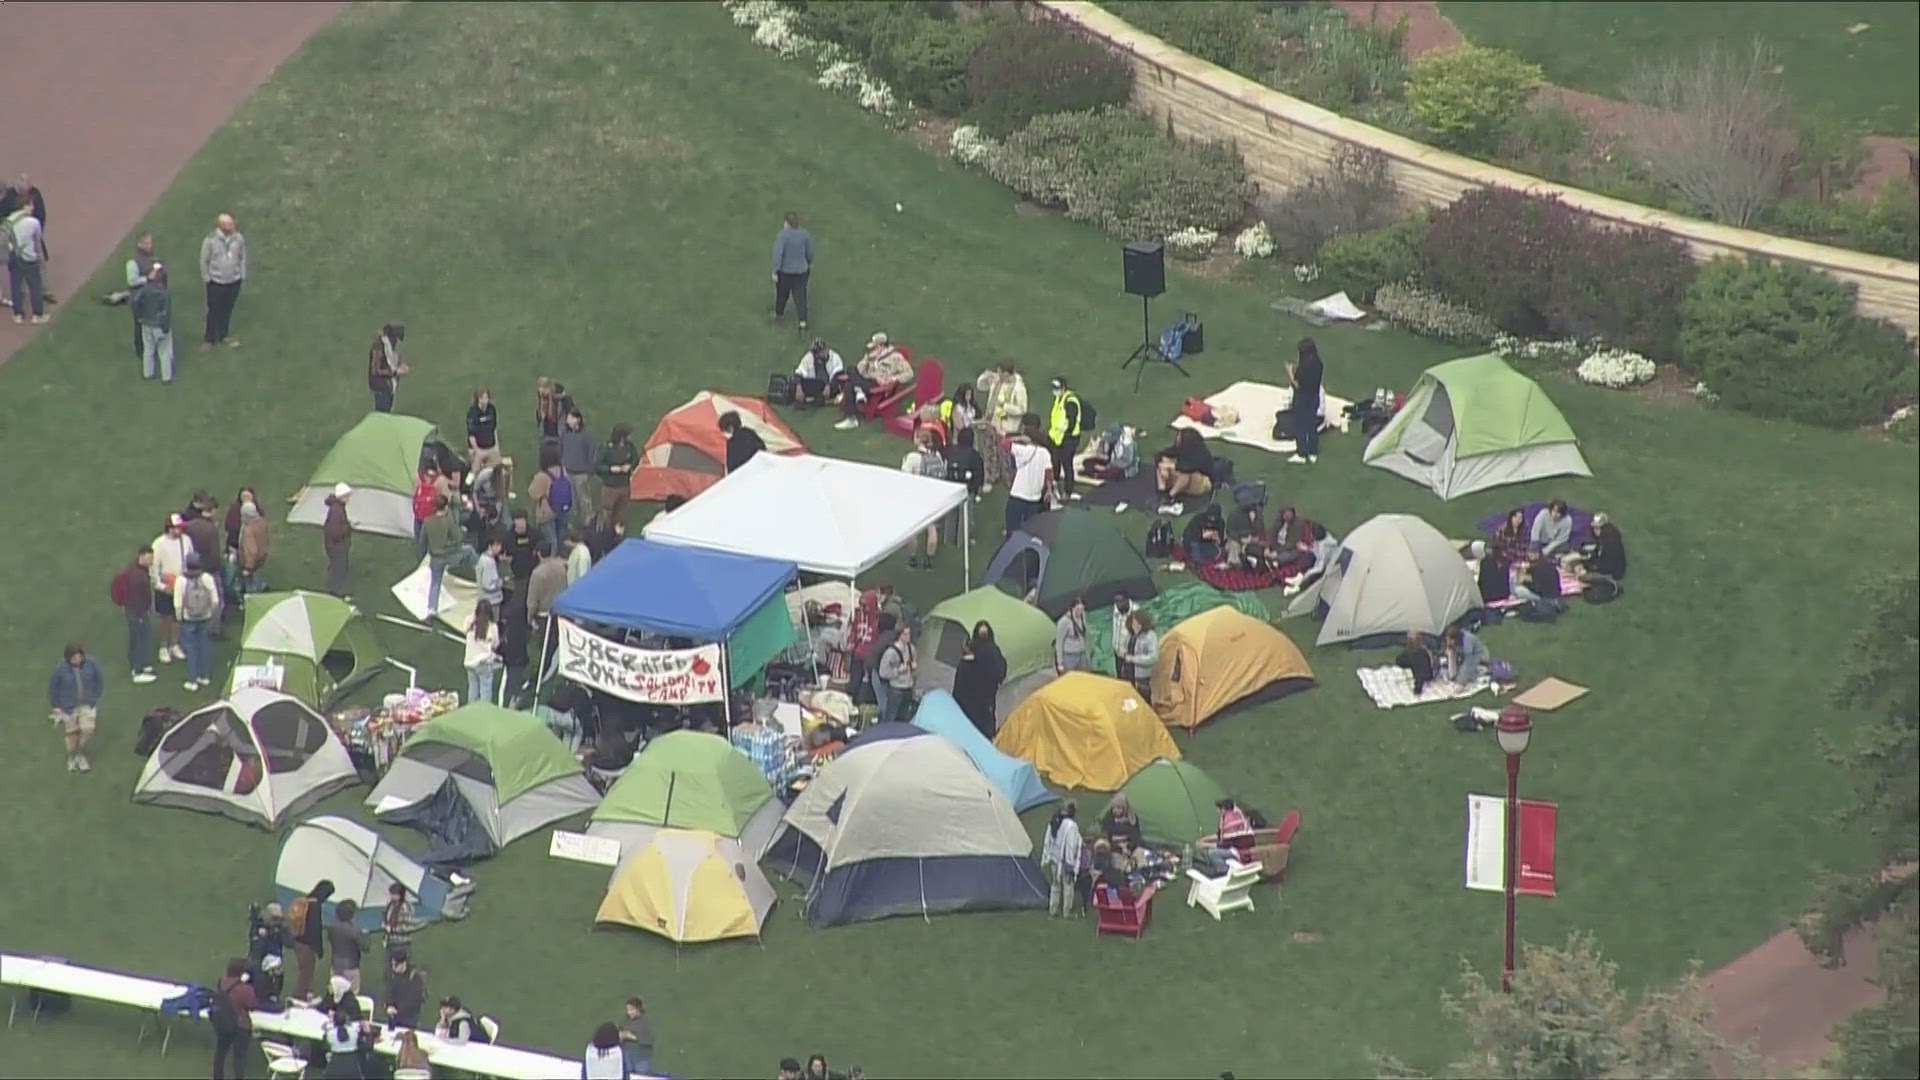 Another group of Pro-Palestinian protesters have set up a camp, this time on Denver University's campus.